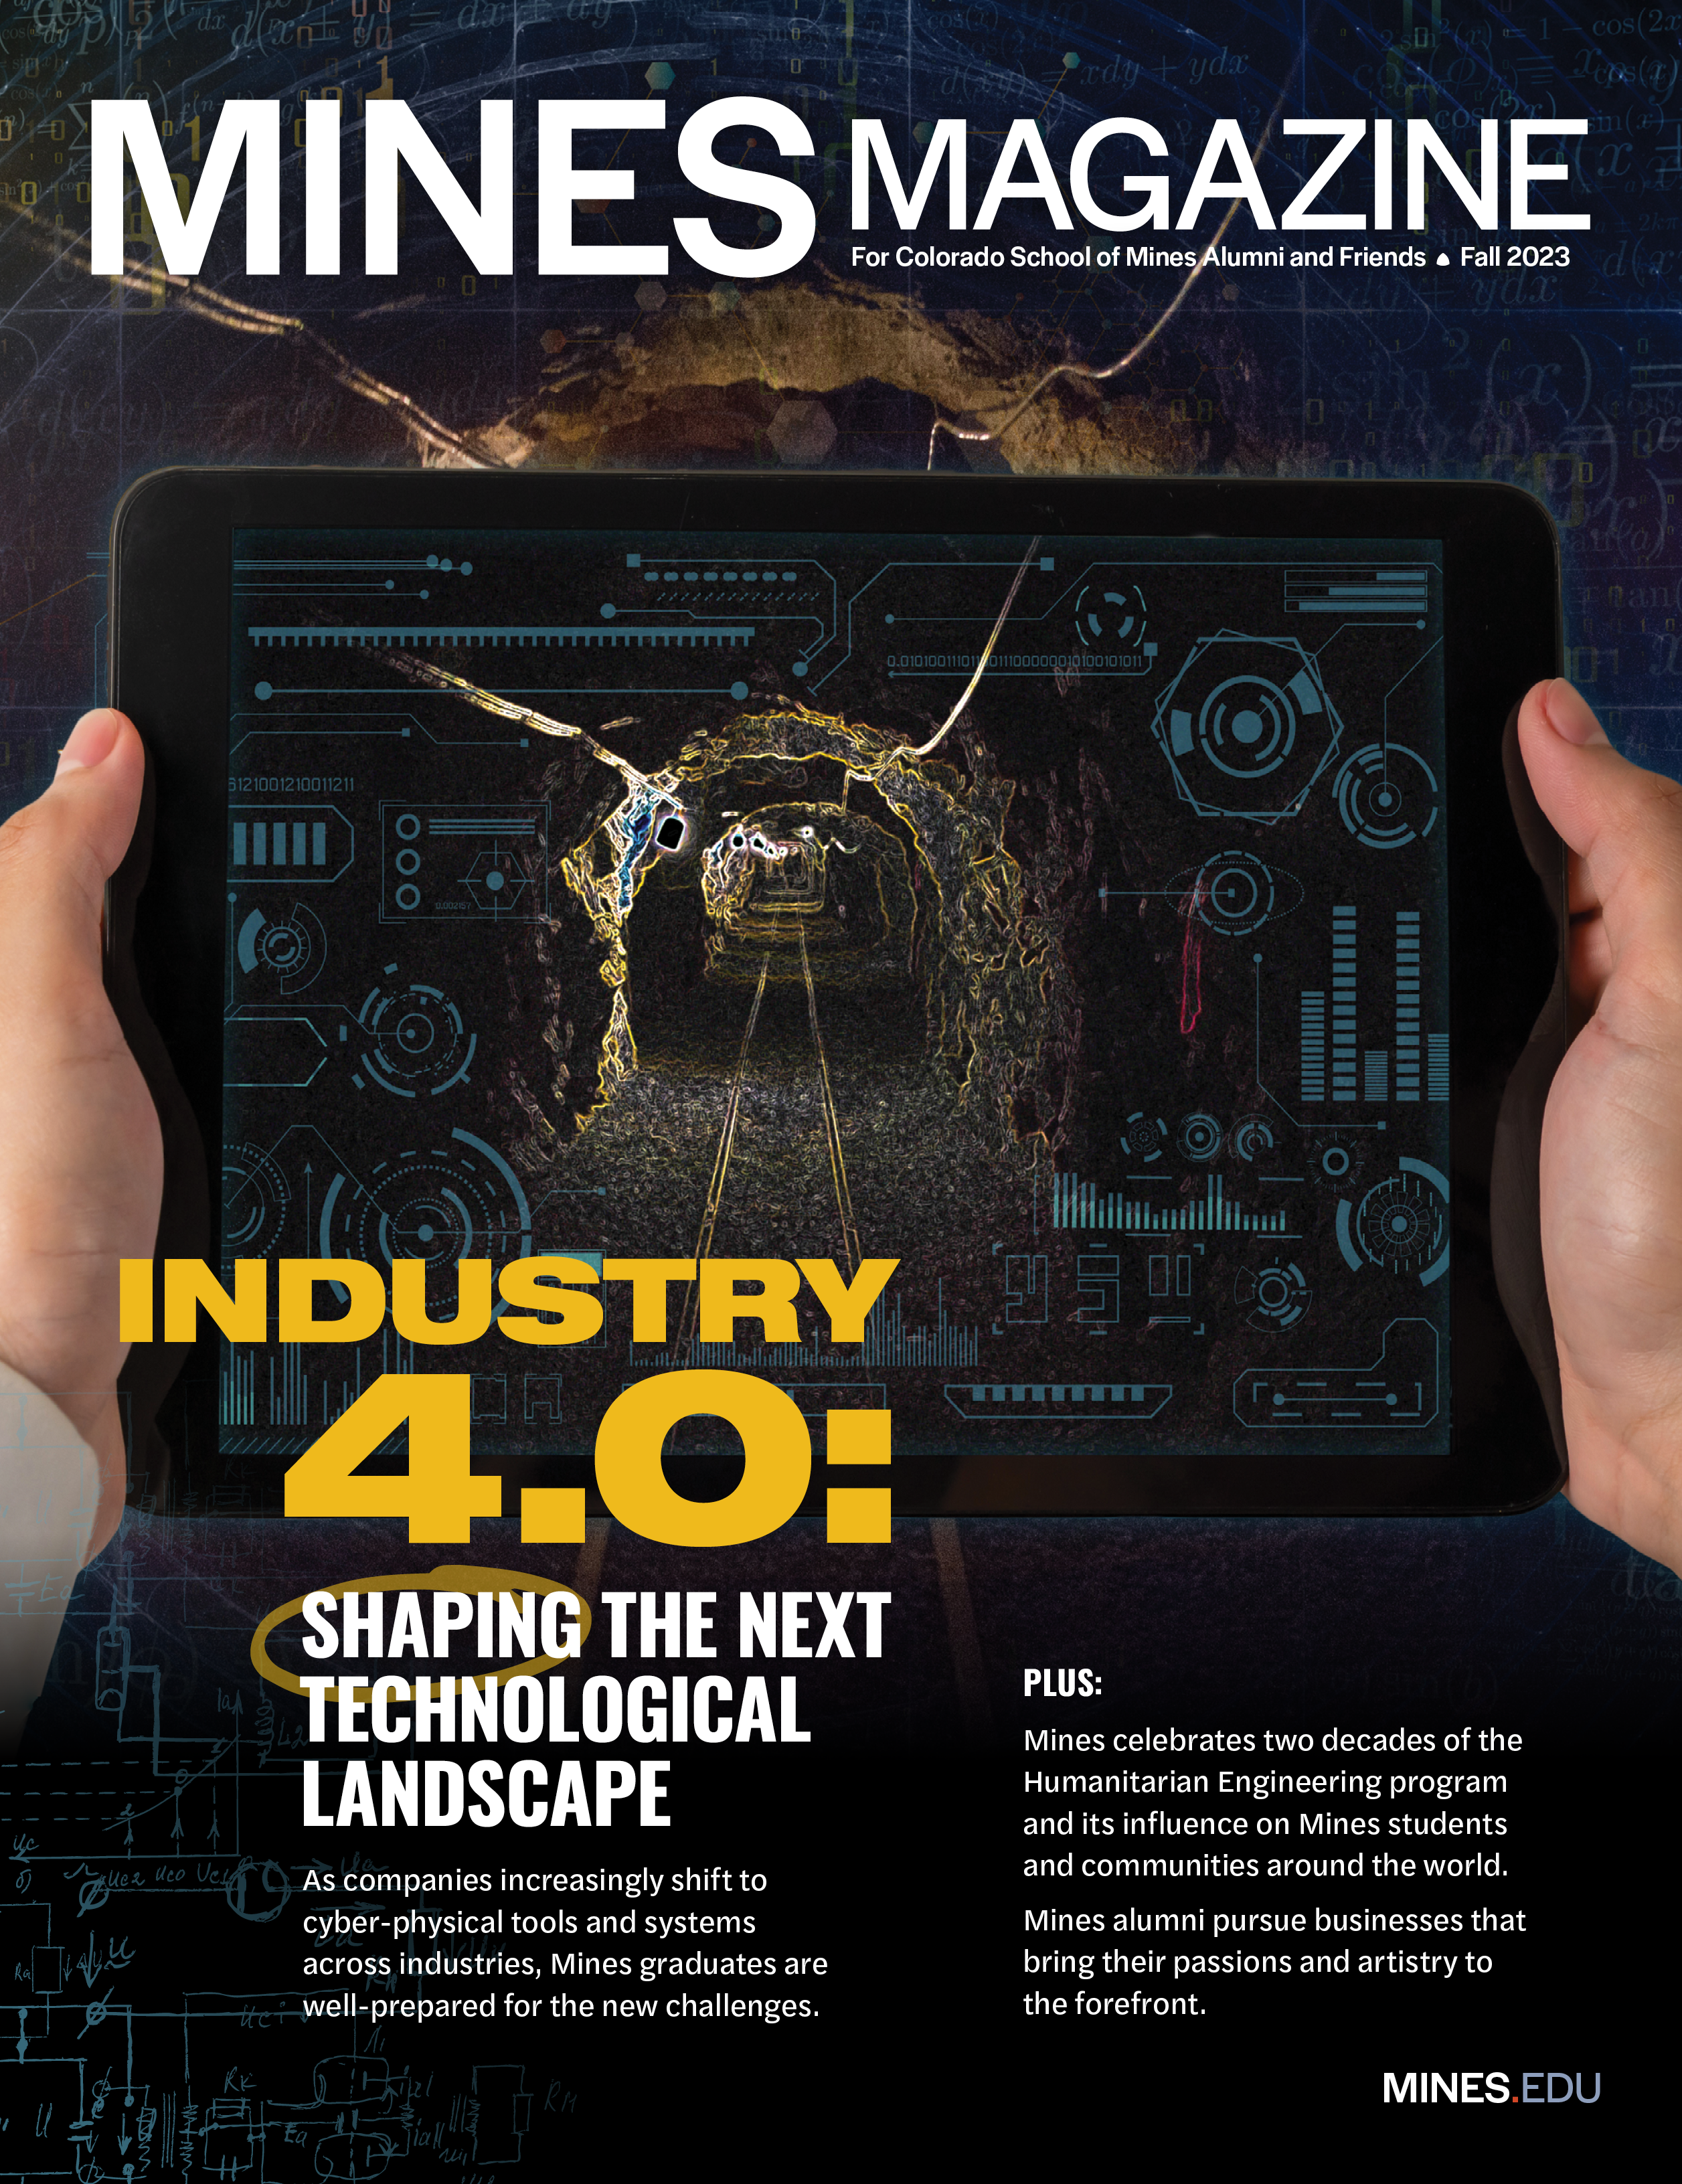 Mines Magazine fall 2023 cover showing a tablet screen with an image of a mine with a digital overlay.